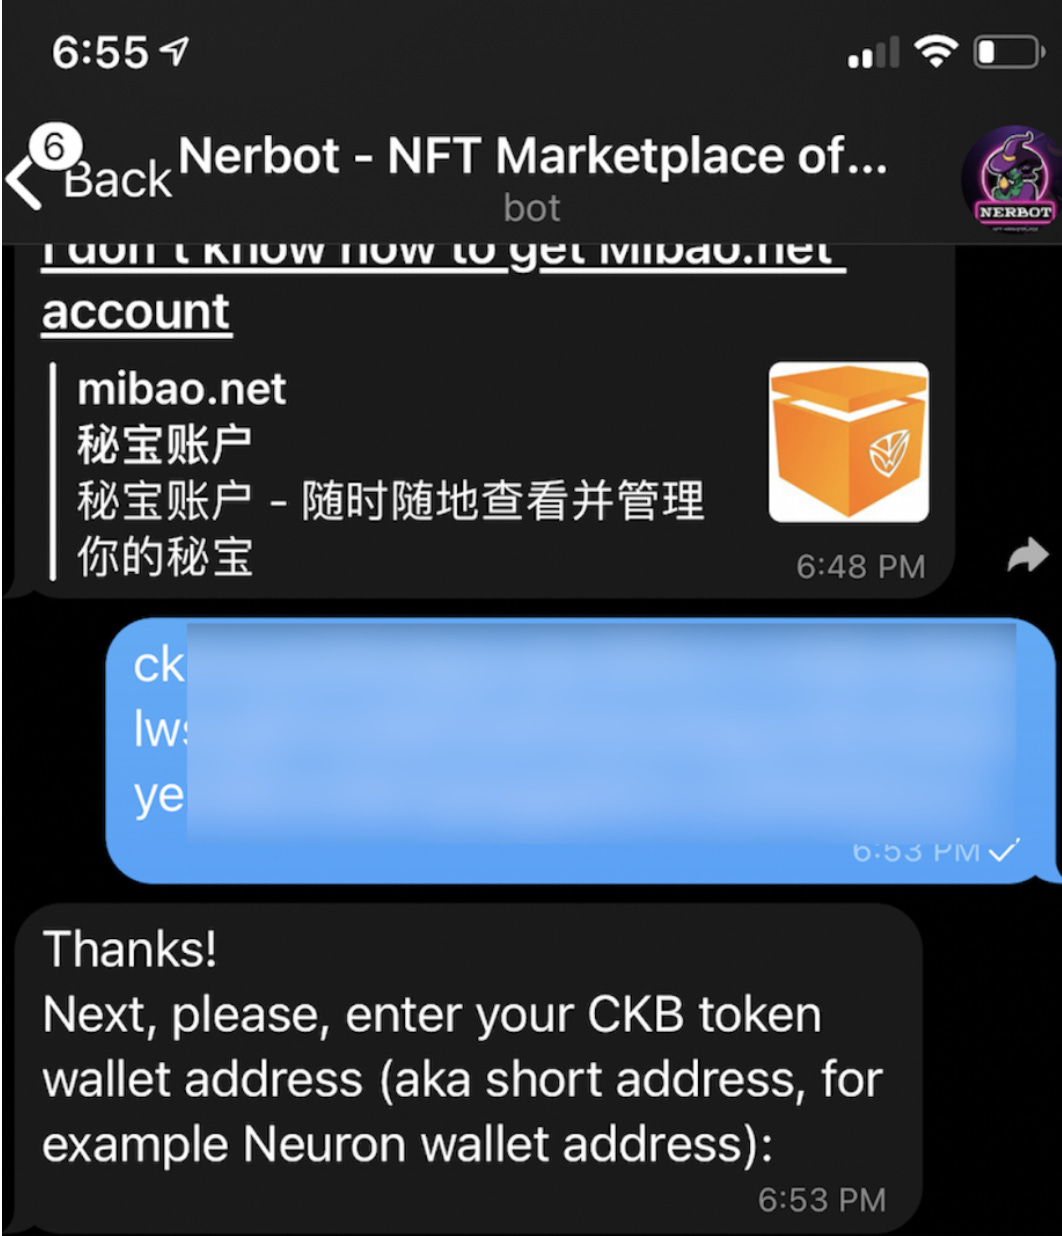 r/NervosNetwork - How do I use Nerfbot to Buy my First NFT on the Nervos Network?